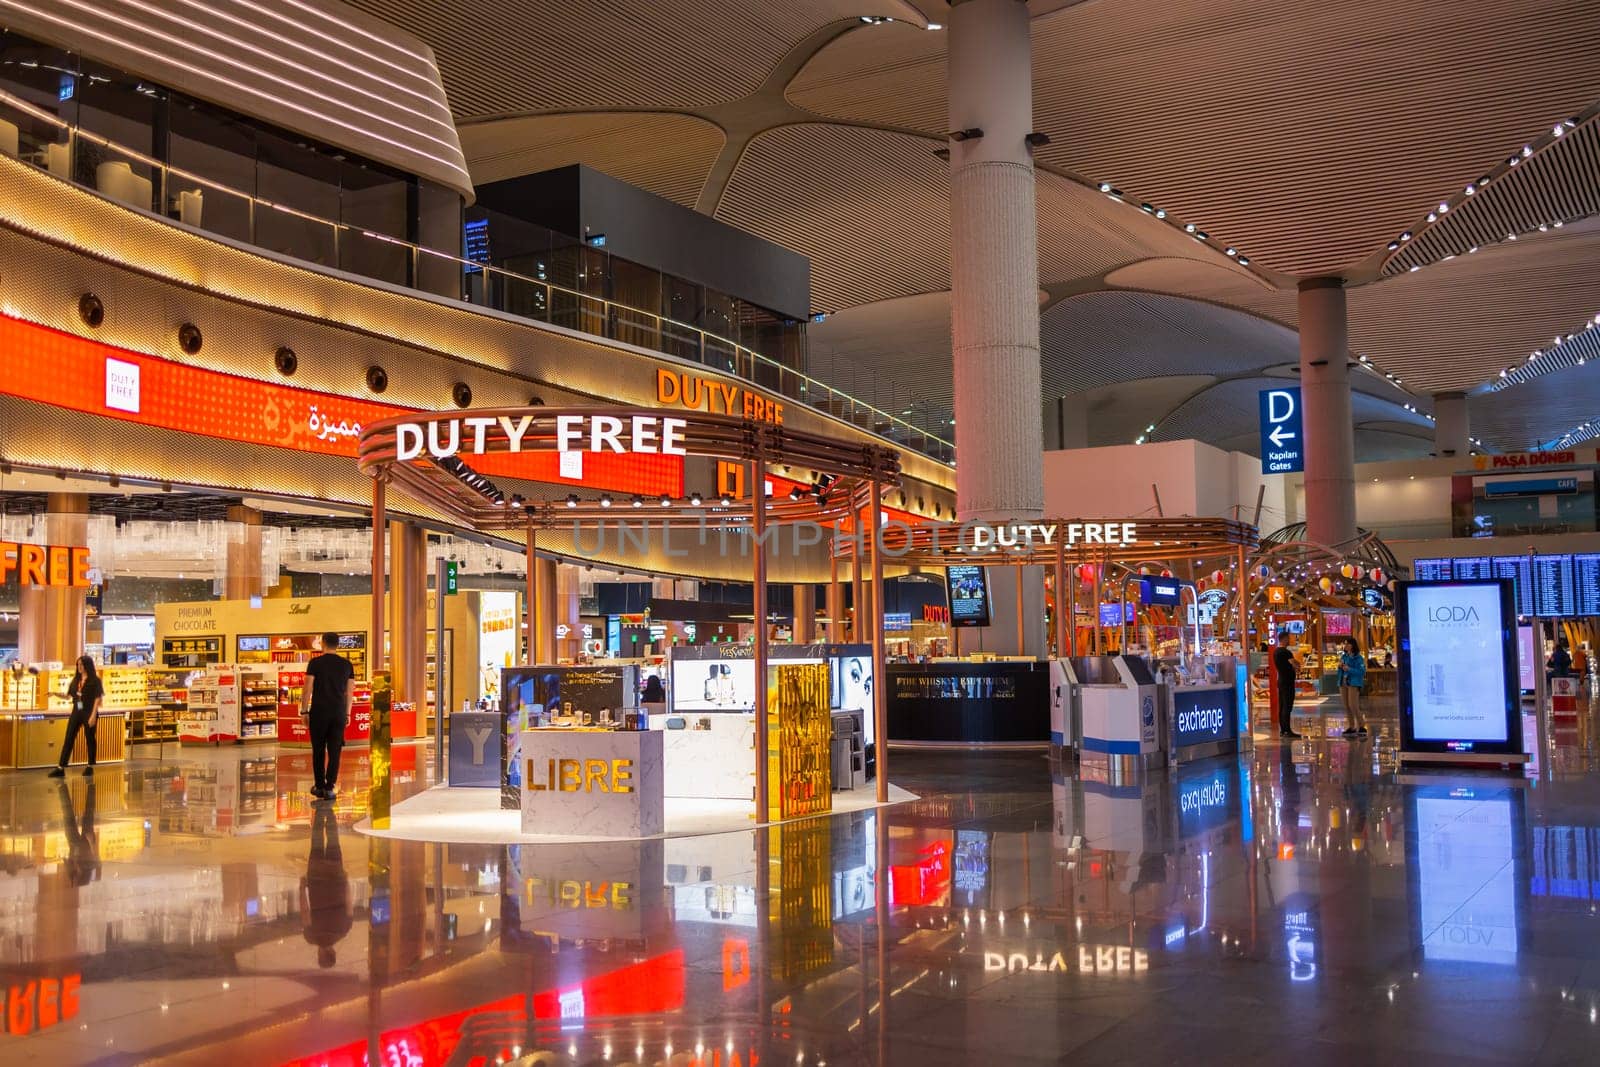 ISTANBUL, TURKEY - August 09, 2022: A view of duty free shops and stores at the international departure terminal of New International Istanbul Airport